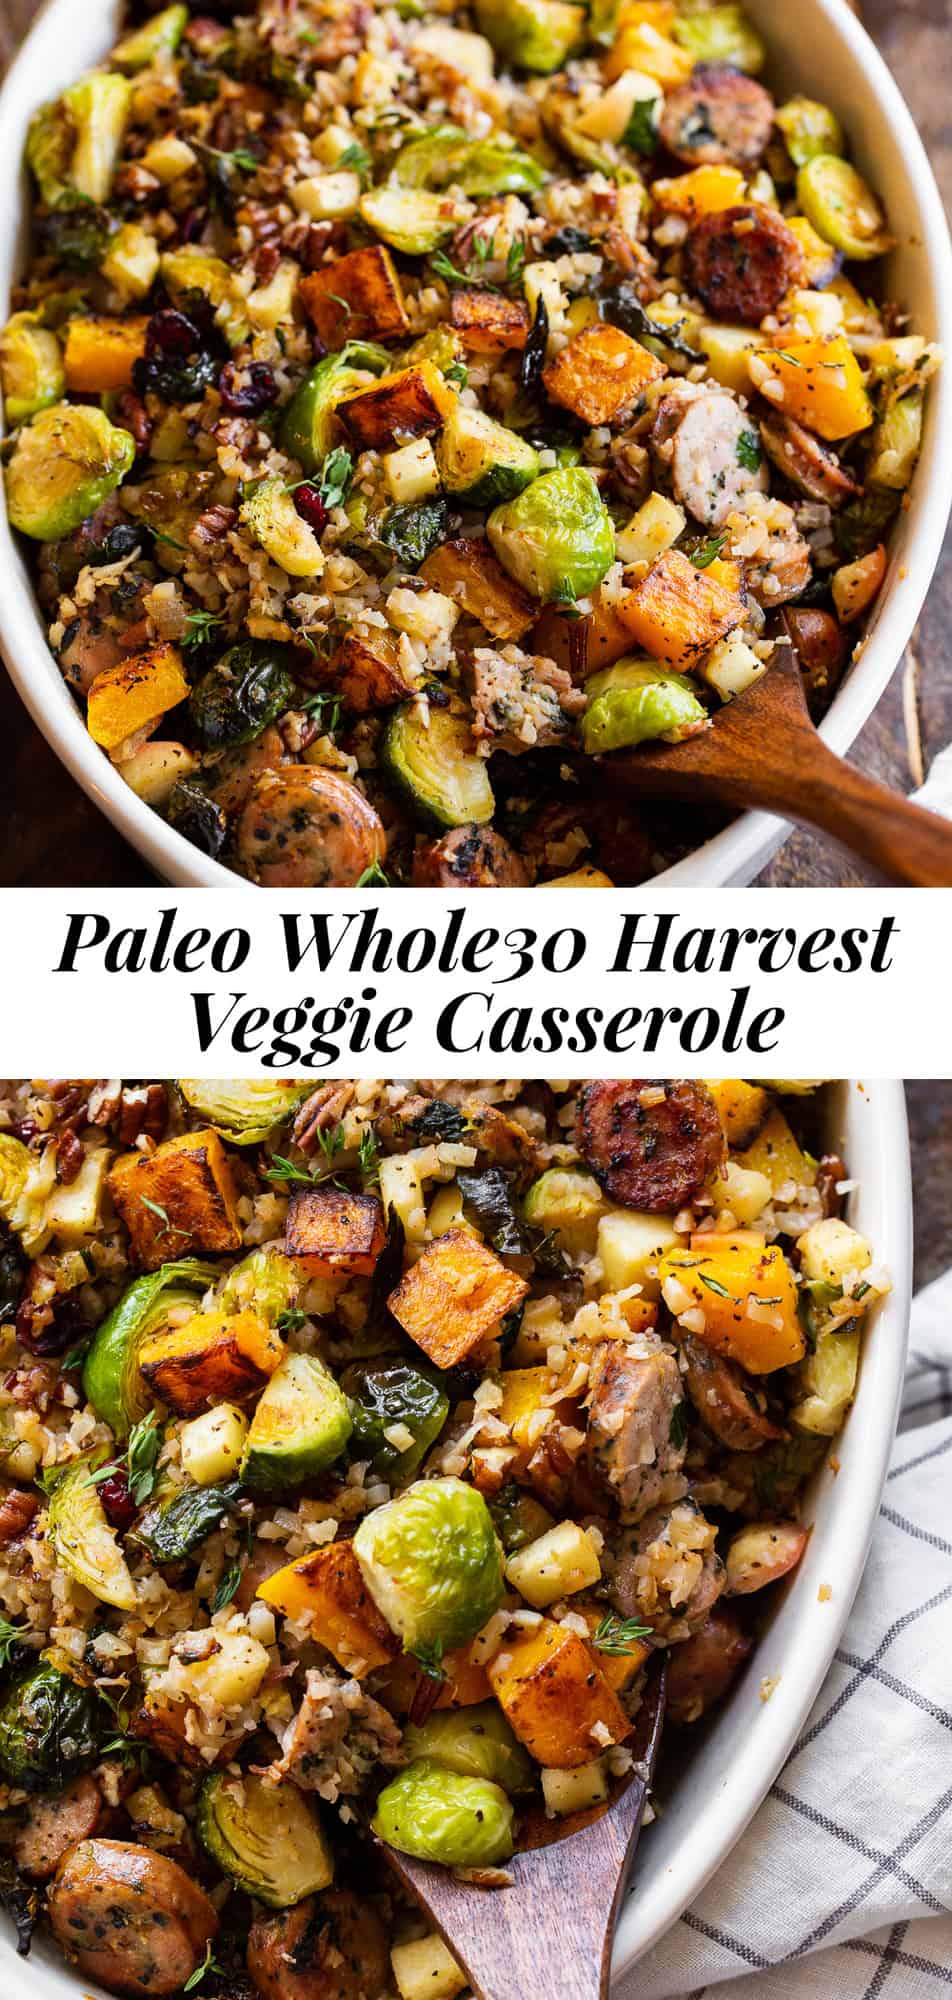 This savory and sweet harvest casserole is packed with veggies, protein, fresh herbs and all the best fall flavors! Serve it as a holiday side dish or a special seasonal meal. The leftovers are delicious for any meal! Paleo friendly, dairy free, Whole30. #paleo #whole30 #cleaneating 